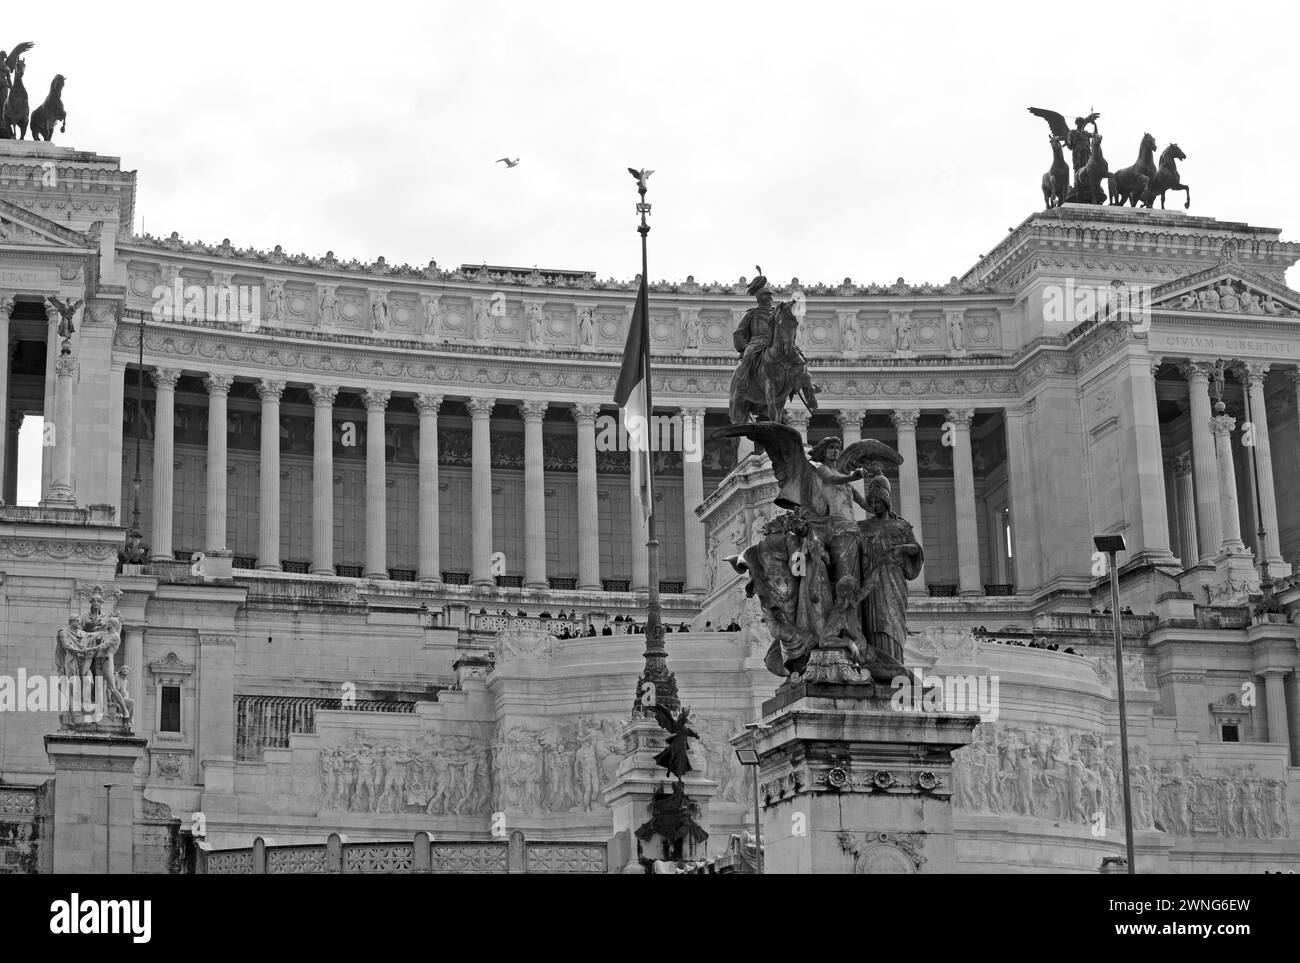 Full Framed image of the Victoria Emmanuel Memorial located in Rome.  It is a very large white marble building and has a viewing platform at the top w Stock Photo